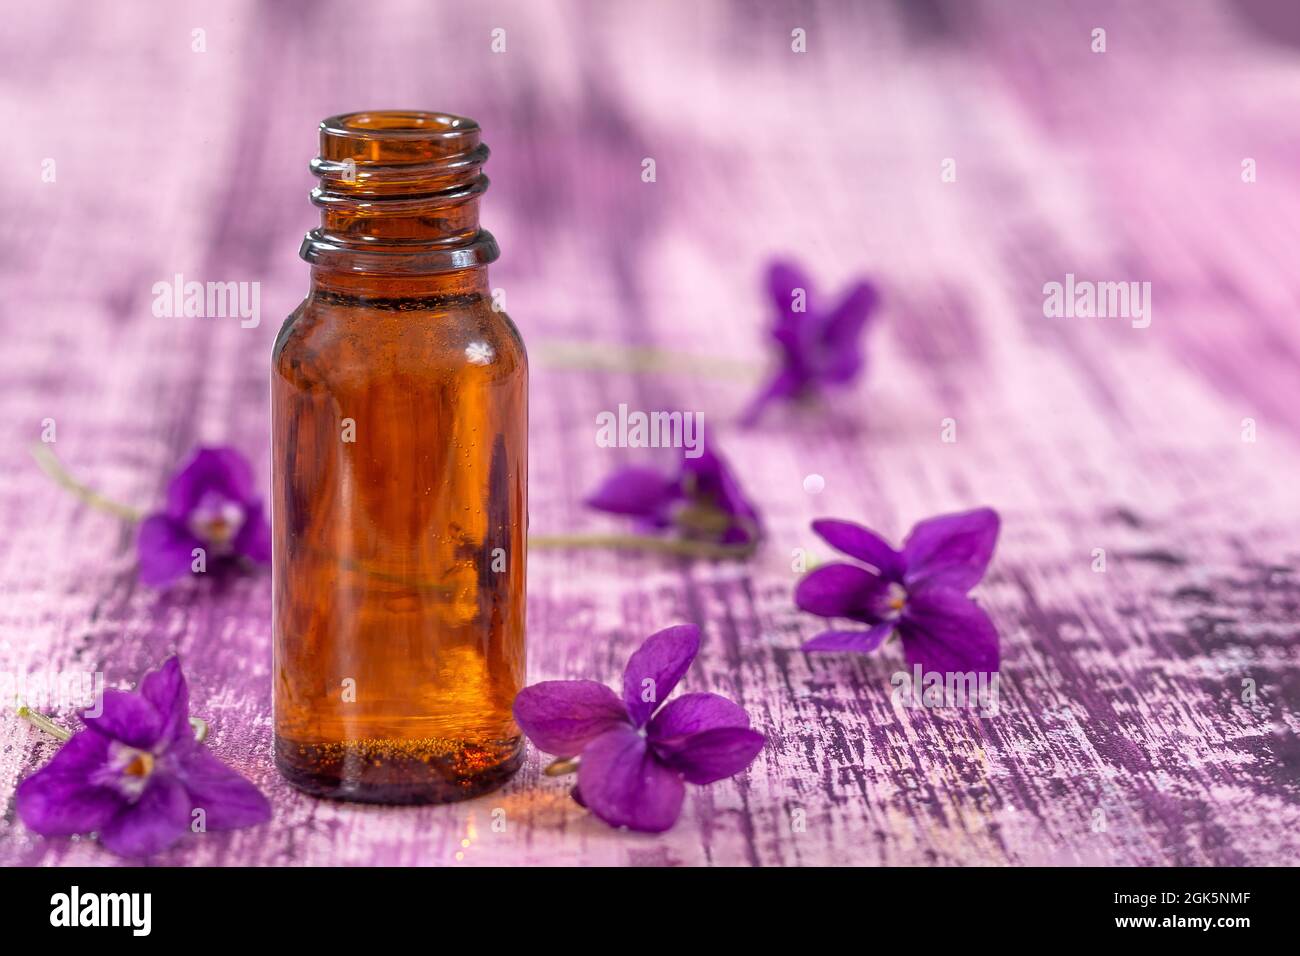 Oil and flower of violets for essential oil therapy Stock Photo